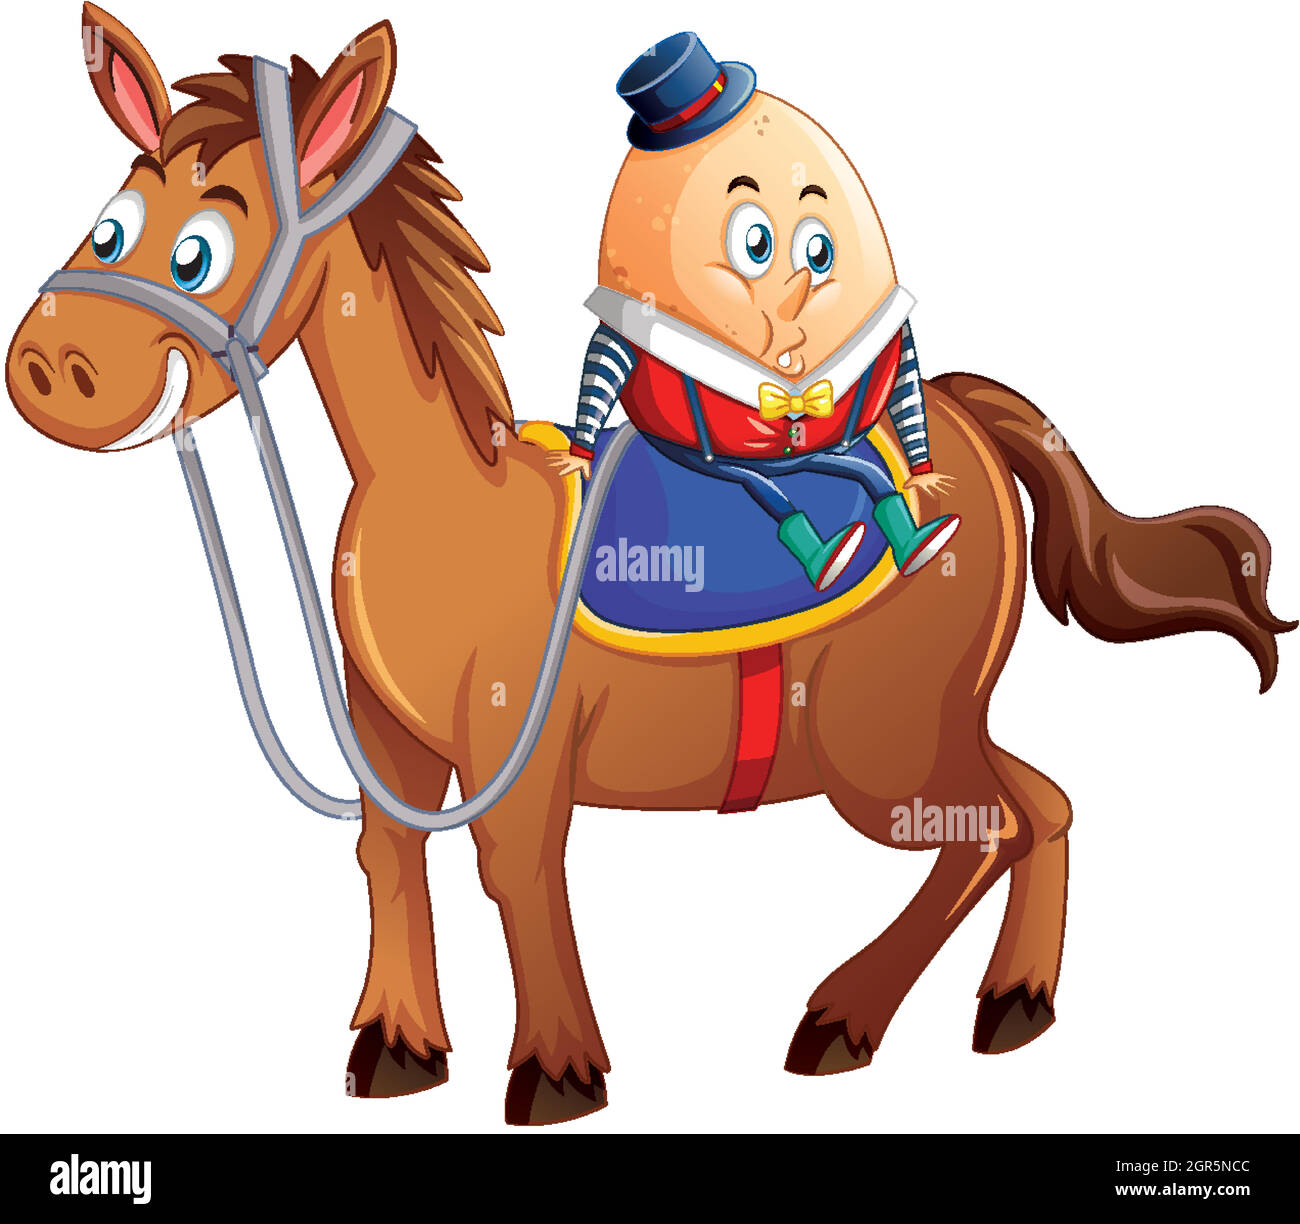 humpty dumpty egg riding a horse on white bakground Stock Vector